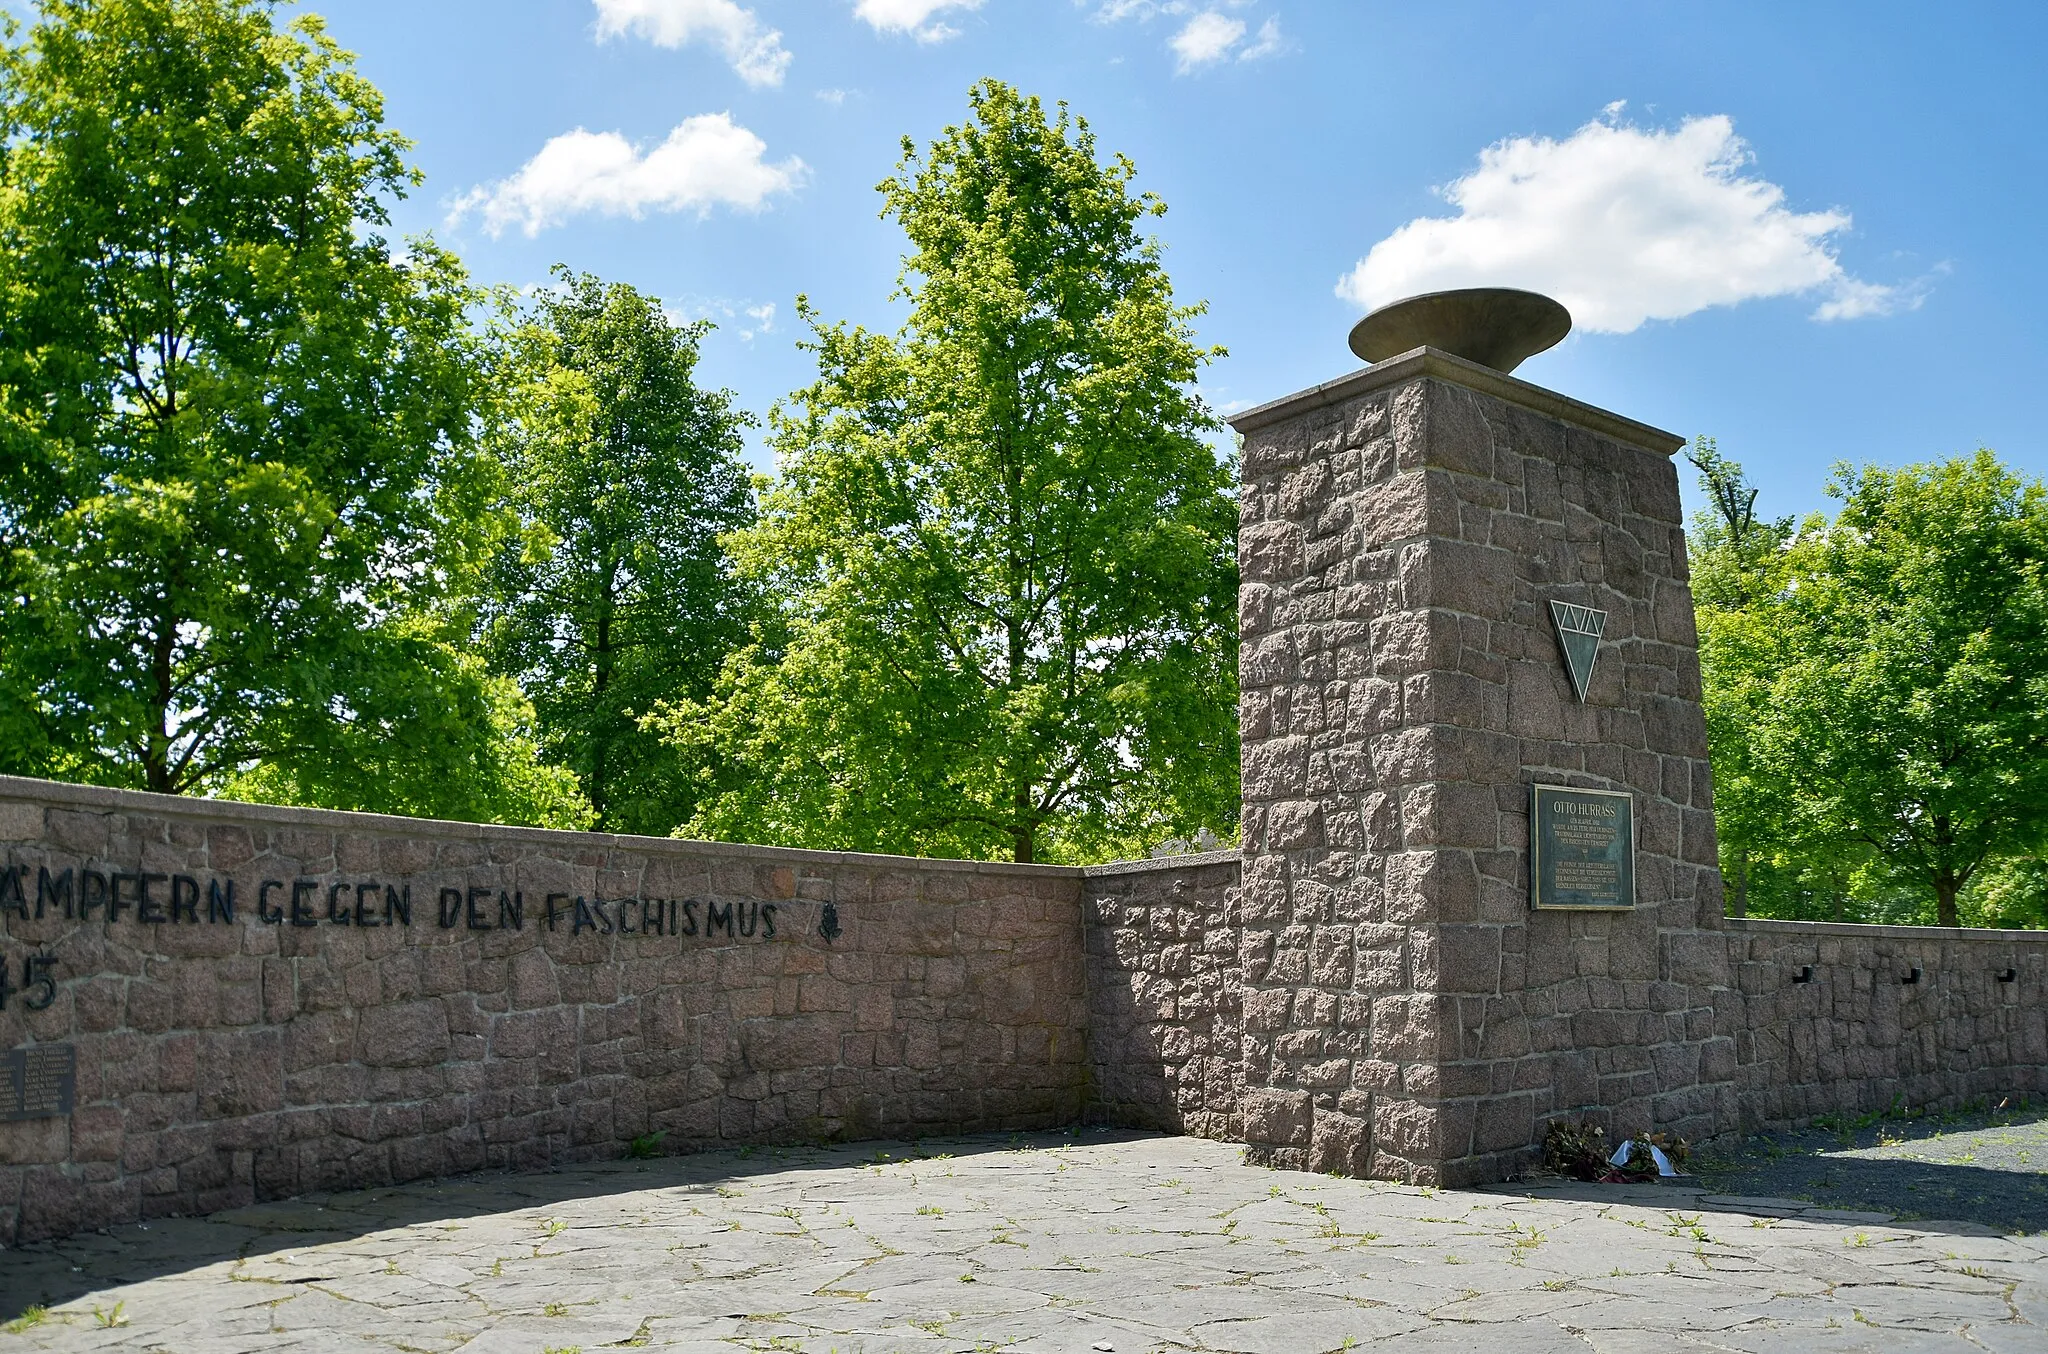 Photo showing: The memorial plaque for the Nazi victim Otto Hurraß in the Volkspark/Schlosspark of Lauchhammer-West in Brandenburg, Germany.